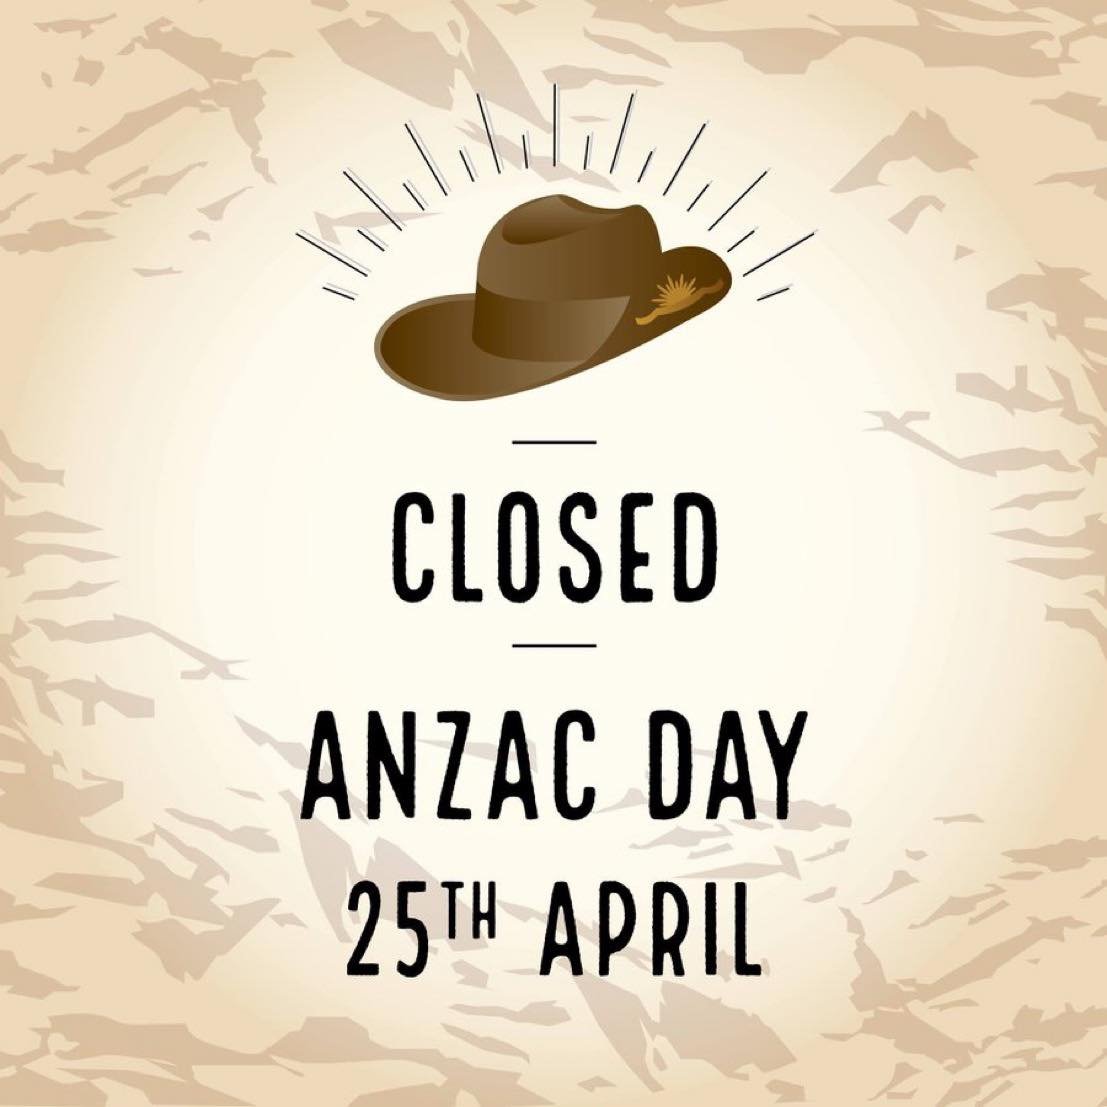 We will be closed on Anzac Day. 

Lest we forget